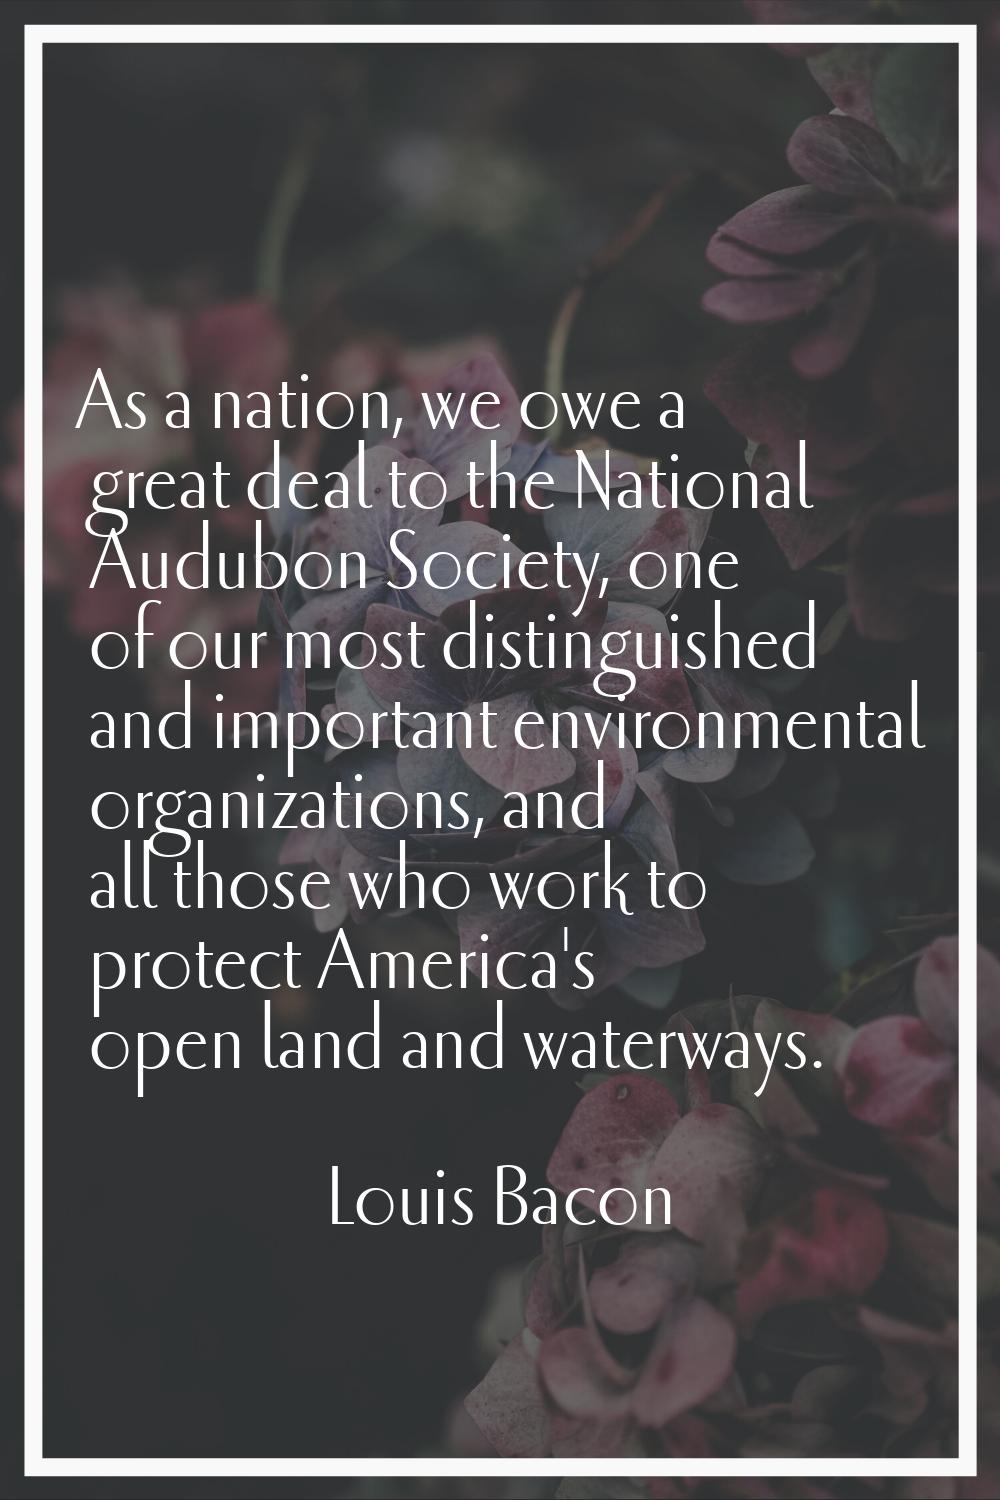 As a nation, we owe a great deal to the National Audubon Society, one of our most distinguished and